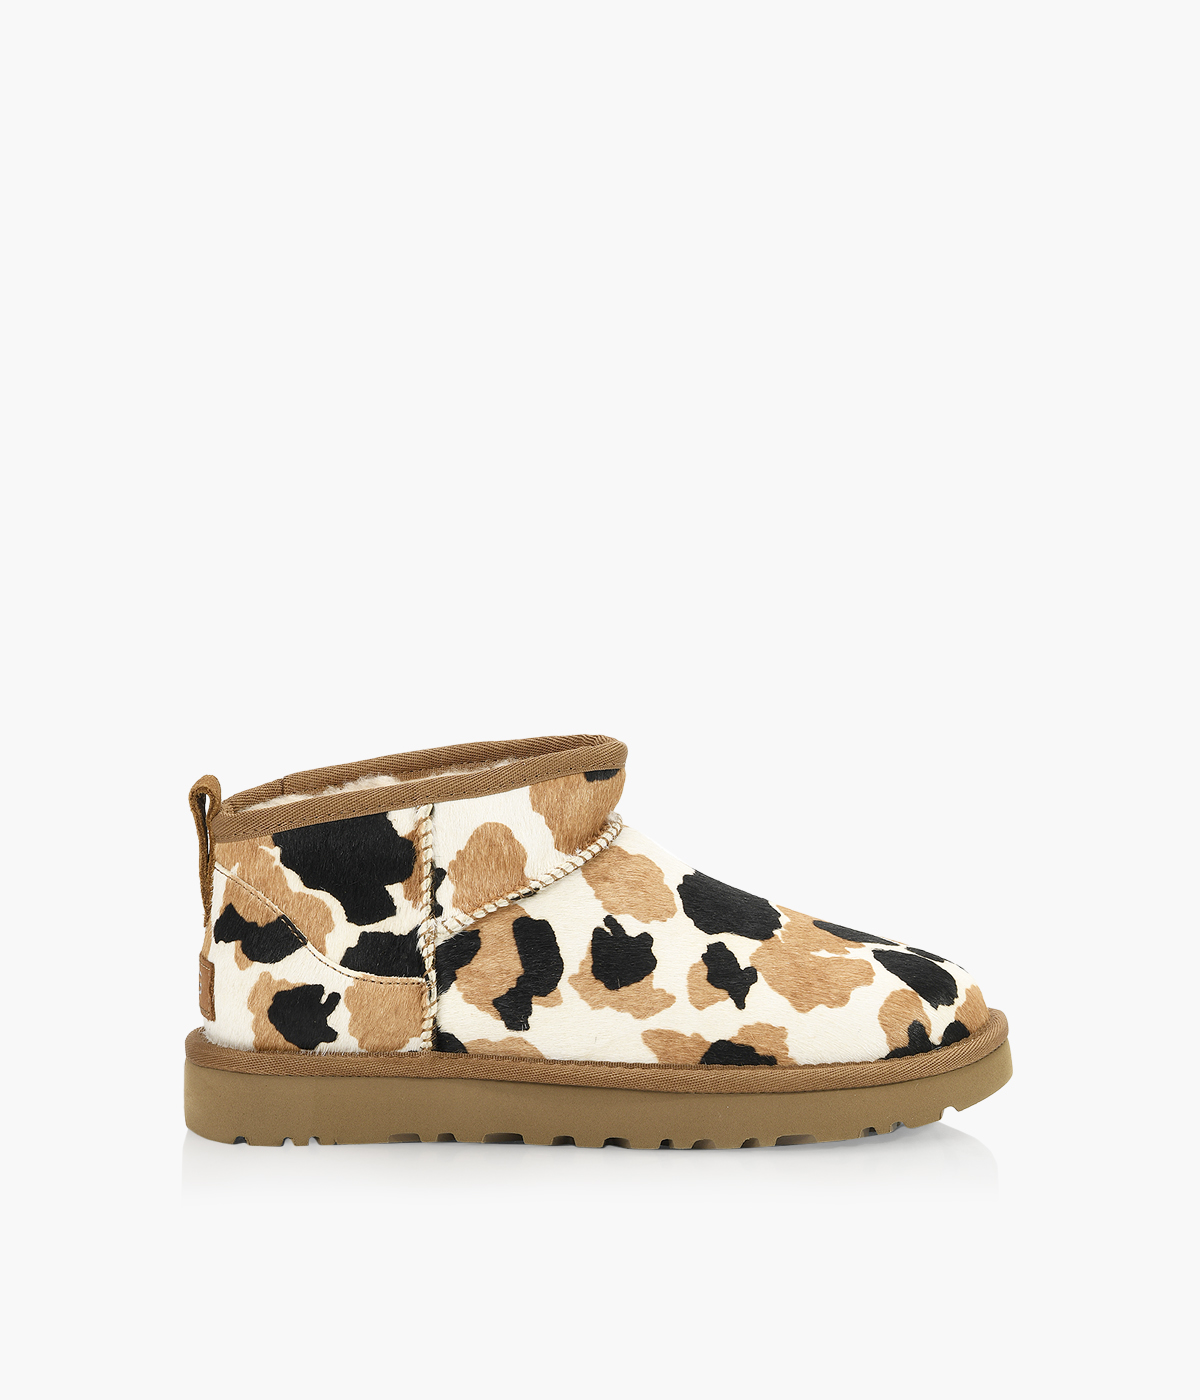 UGG CLASSIC ULTRA MINI COW PRINT - Tan Suede | BrownsShoes